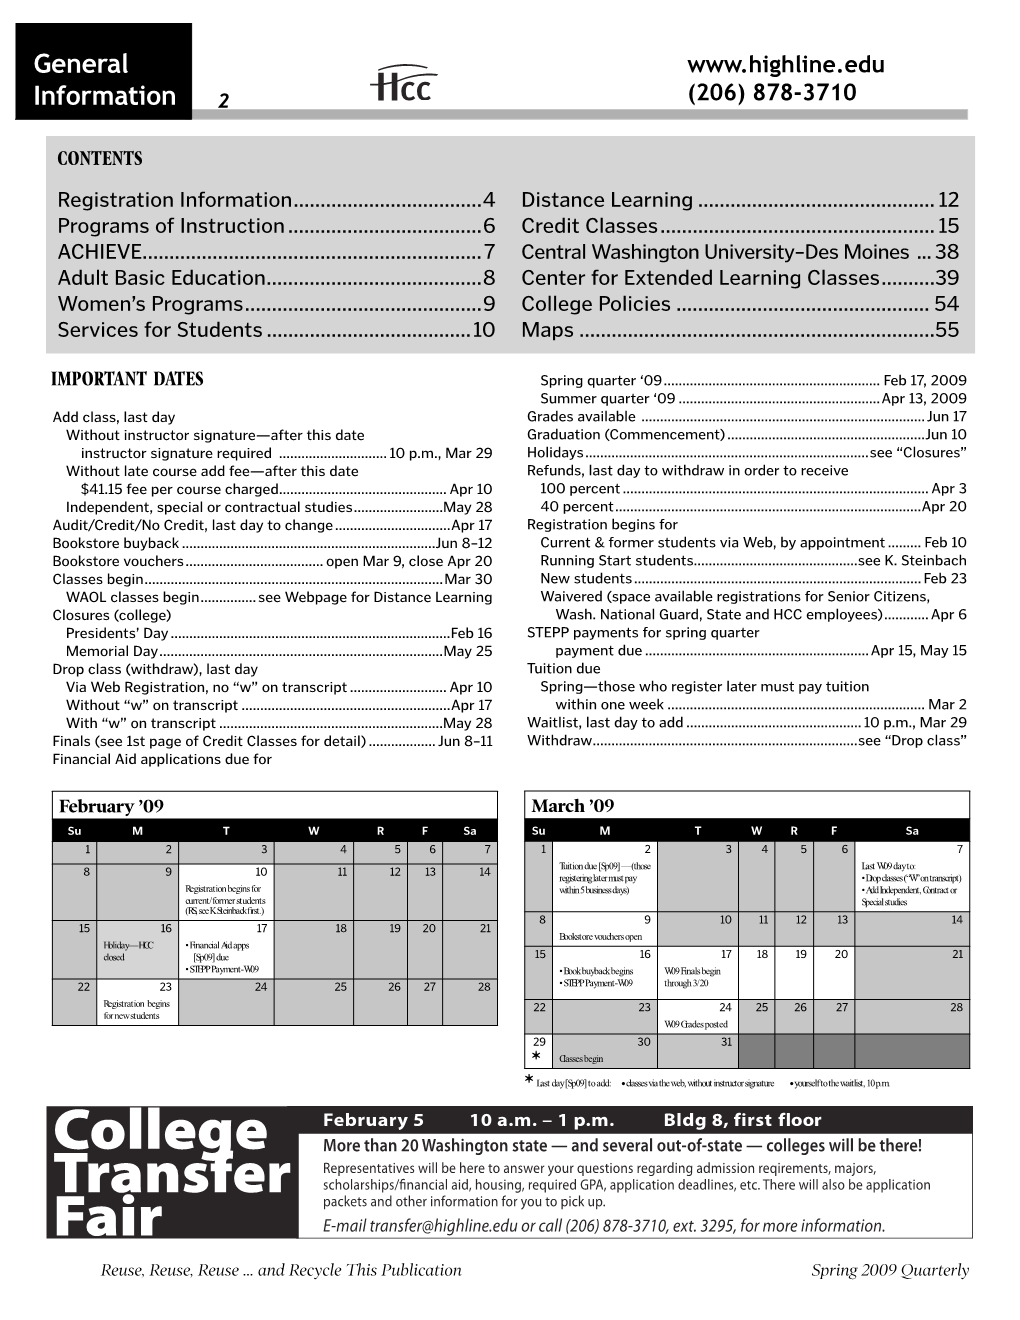 General Information About the Student Mon.–Tue., 8 A.M.–7 P.M.; Wed.–Thu., 8 A.M.–5 P.M.; and Fri., 9 A.M.–5 P.M